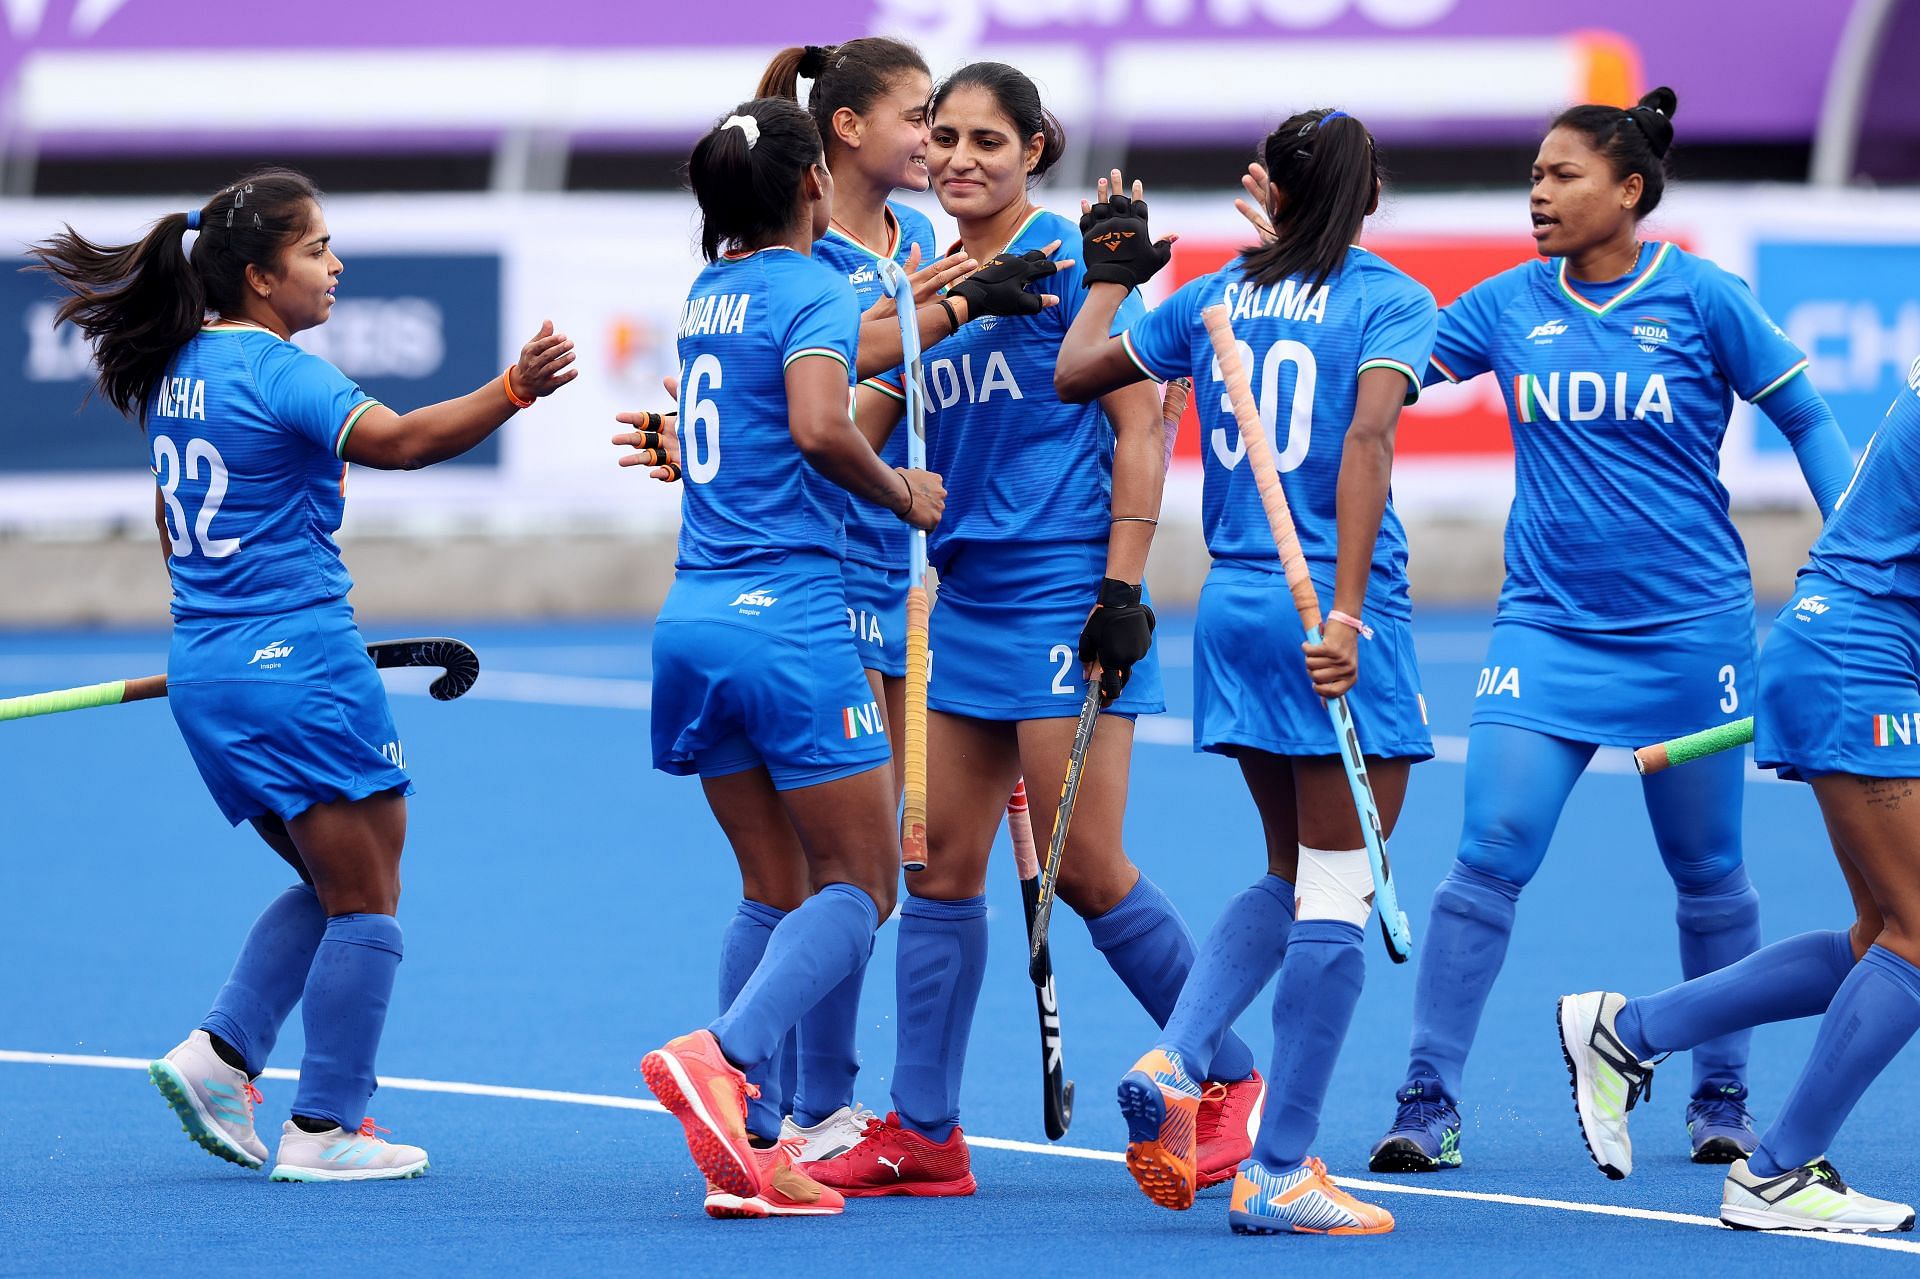 Hockey - Commonwealth Games: Day 1 (Image Courtesy: Getty)